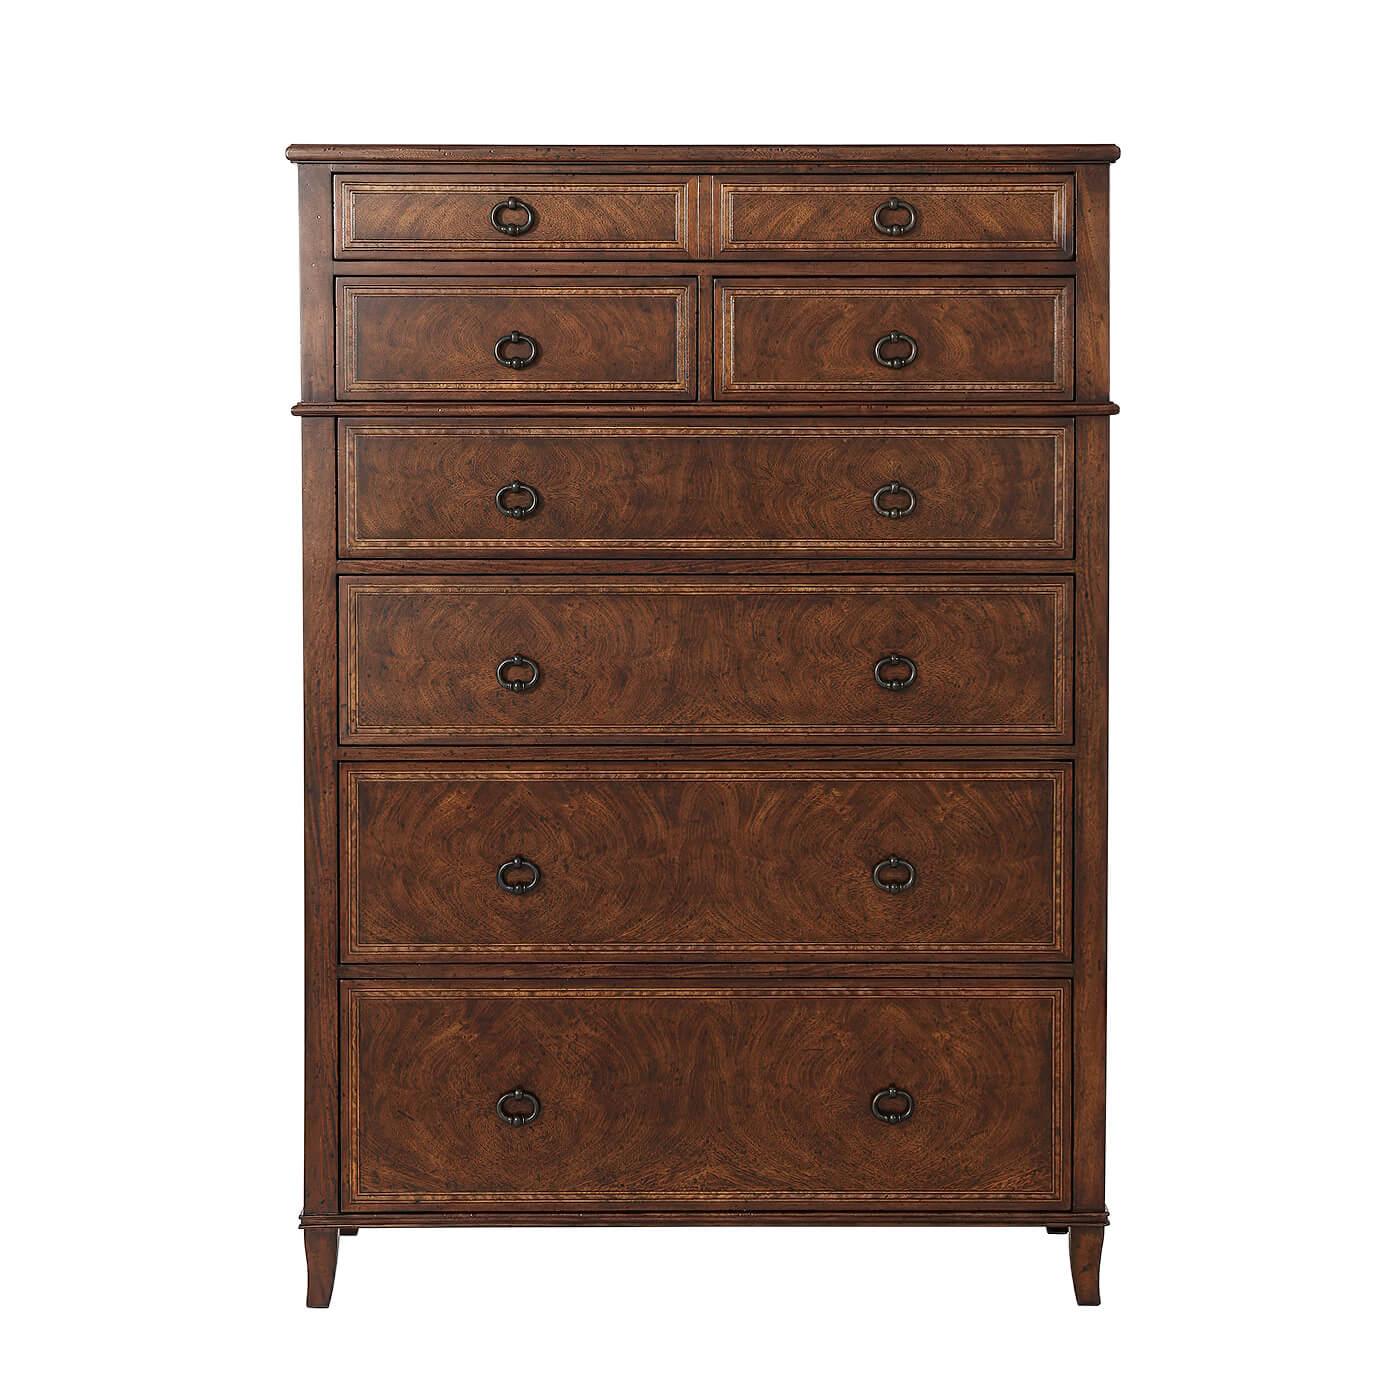 An Italian Neoclassic styler mahogany Gentleman's chest of drawers, the rectangular top above one long drawer, two short drawers and four graduated long drawers, on splayed legs. 

Dimensions: 44